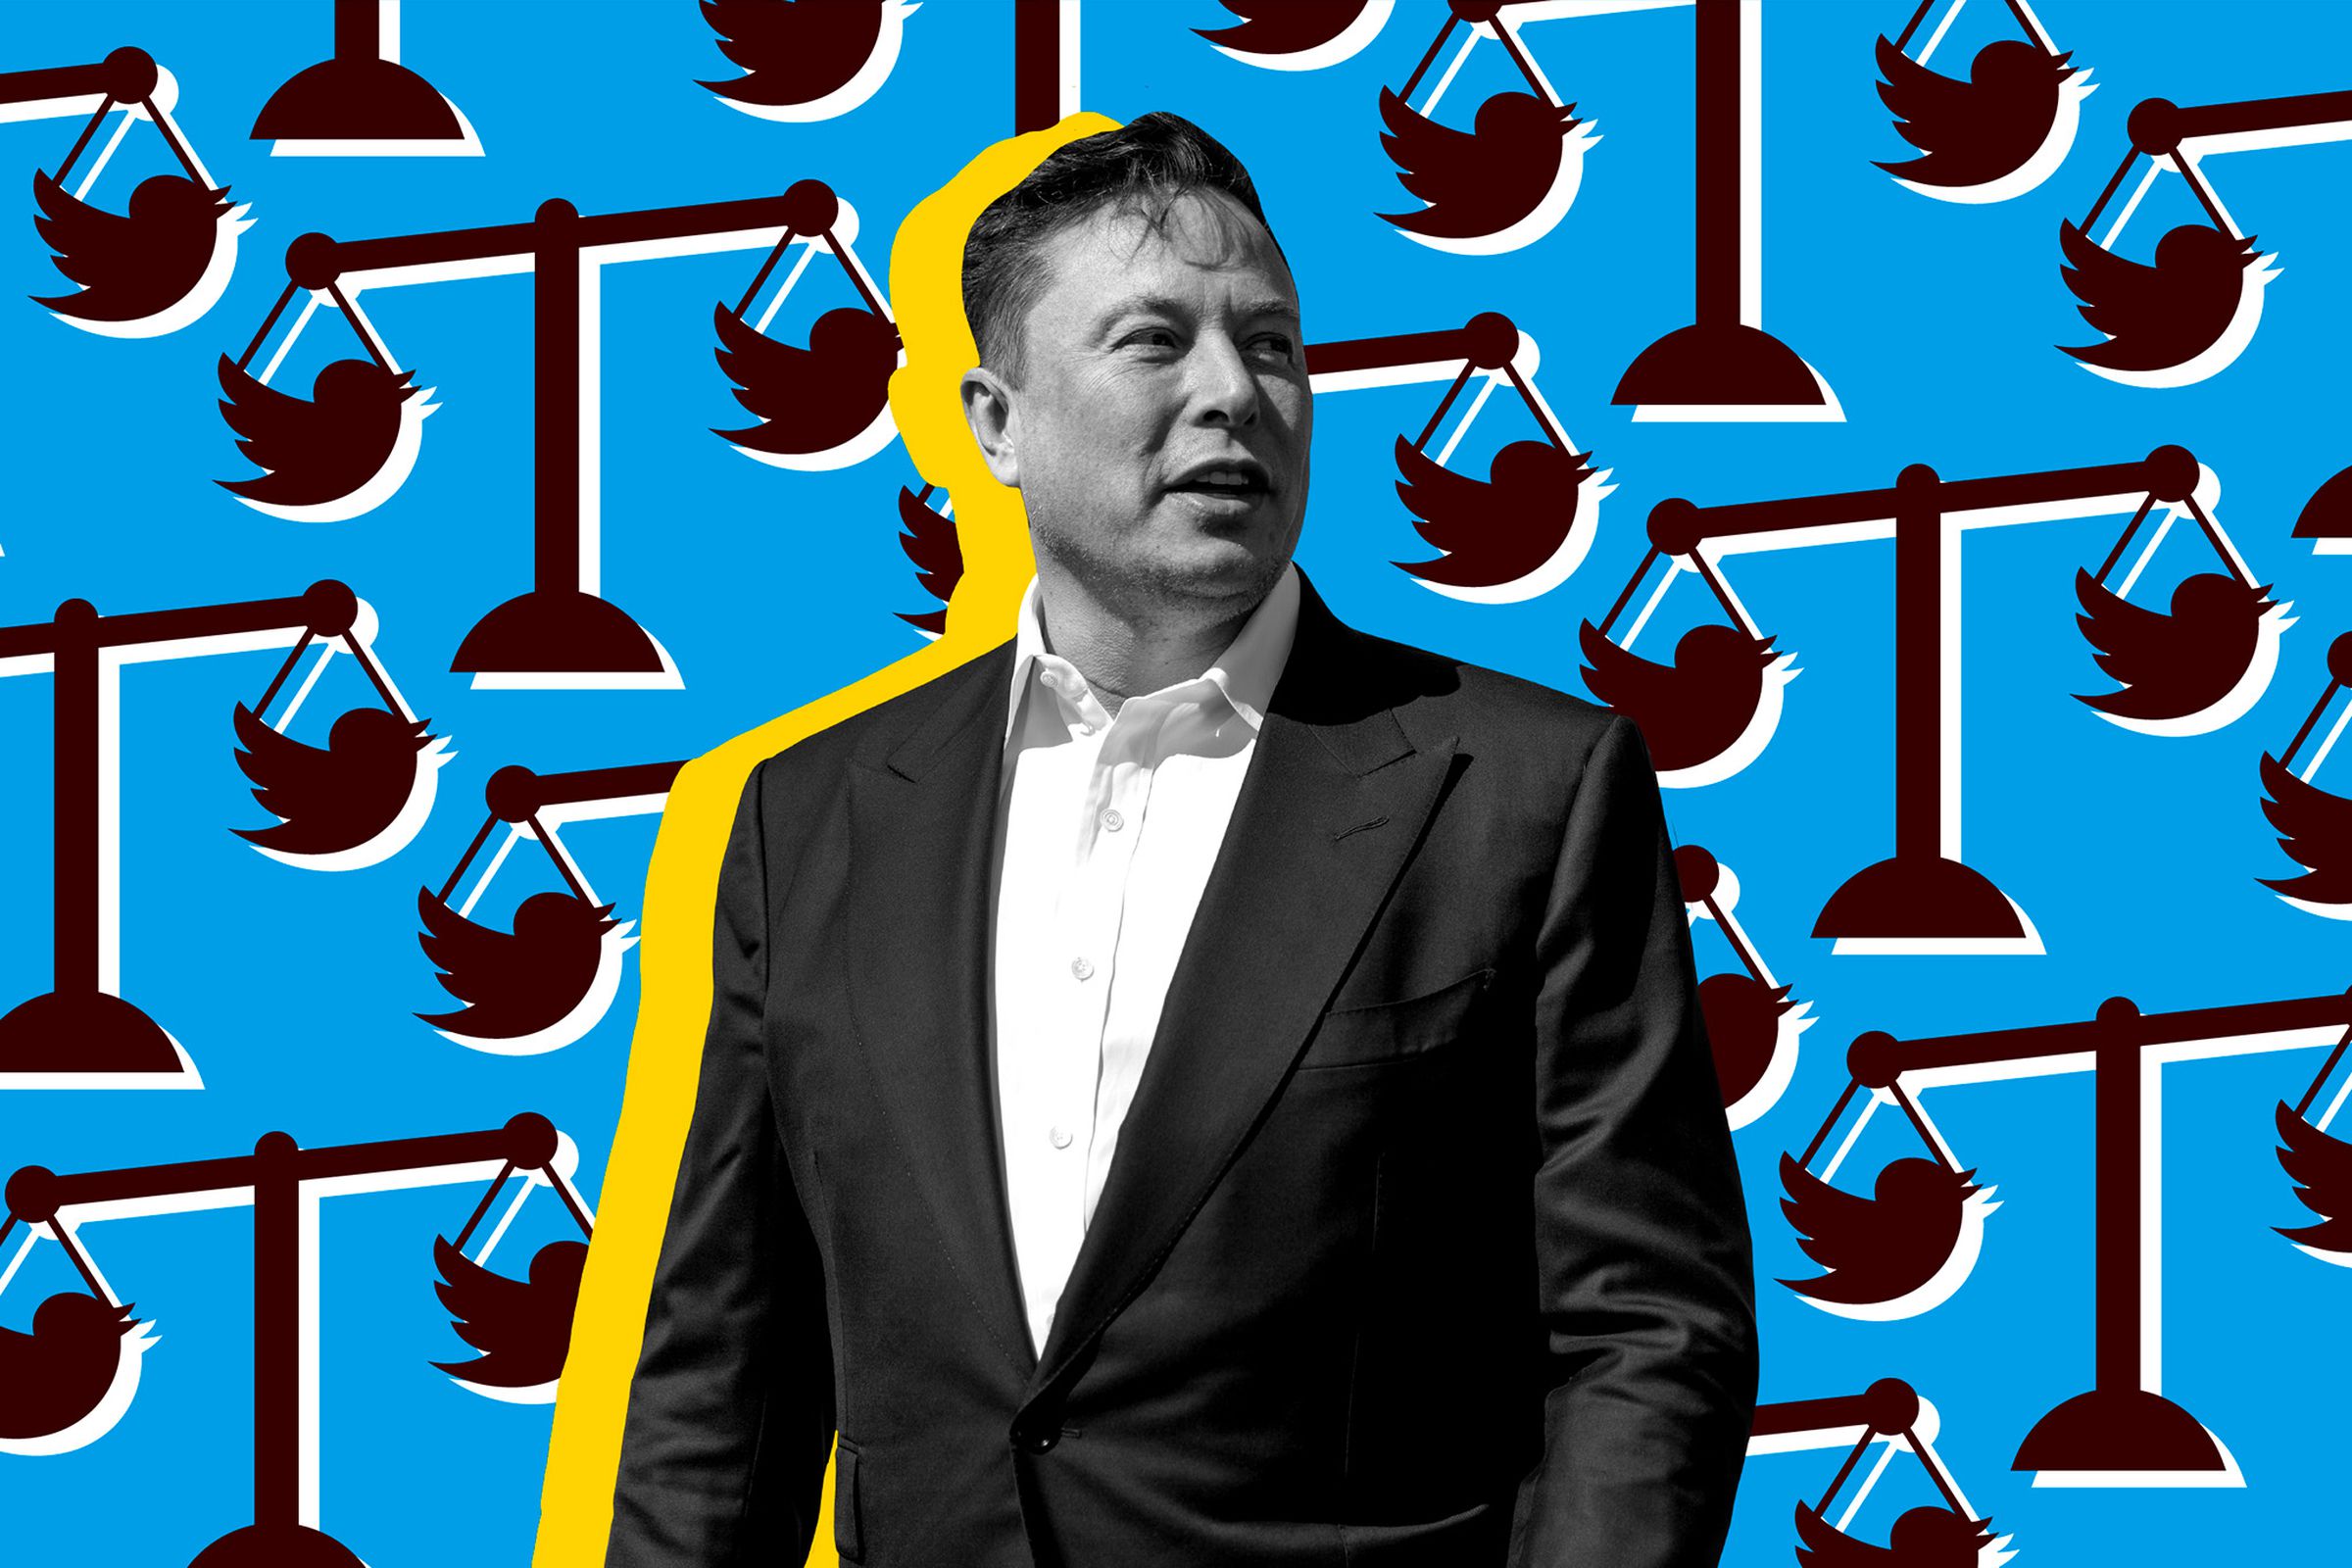 A photo of Elon Musk against a background with the Twitter logo and the scales of justice.